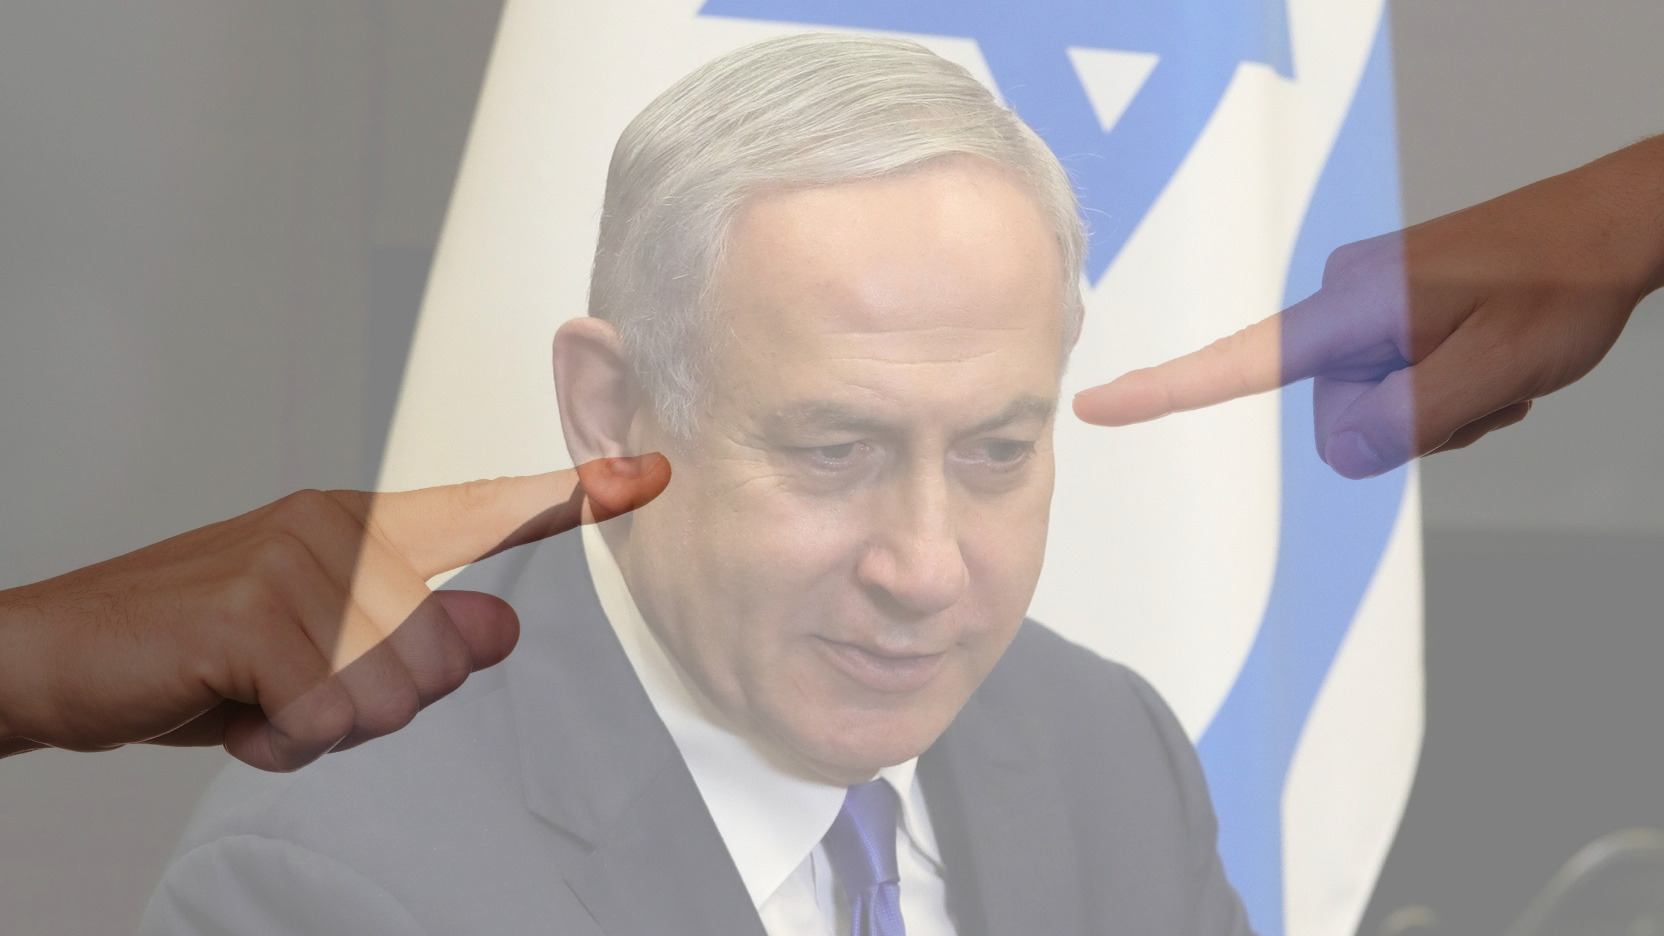 Netanyahu Upsets Left and Right With Mangled Vote